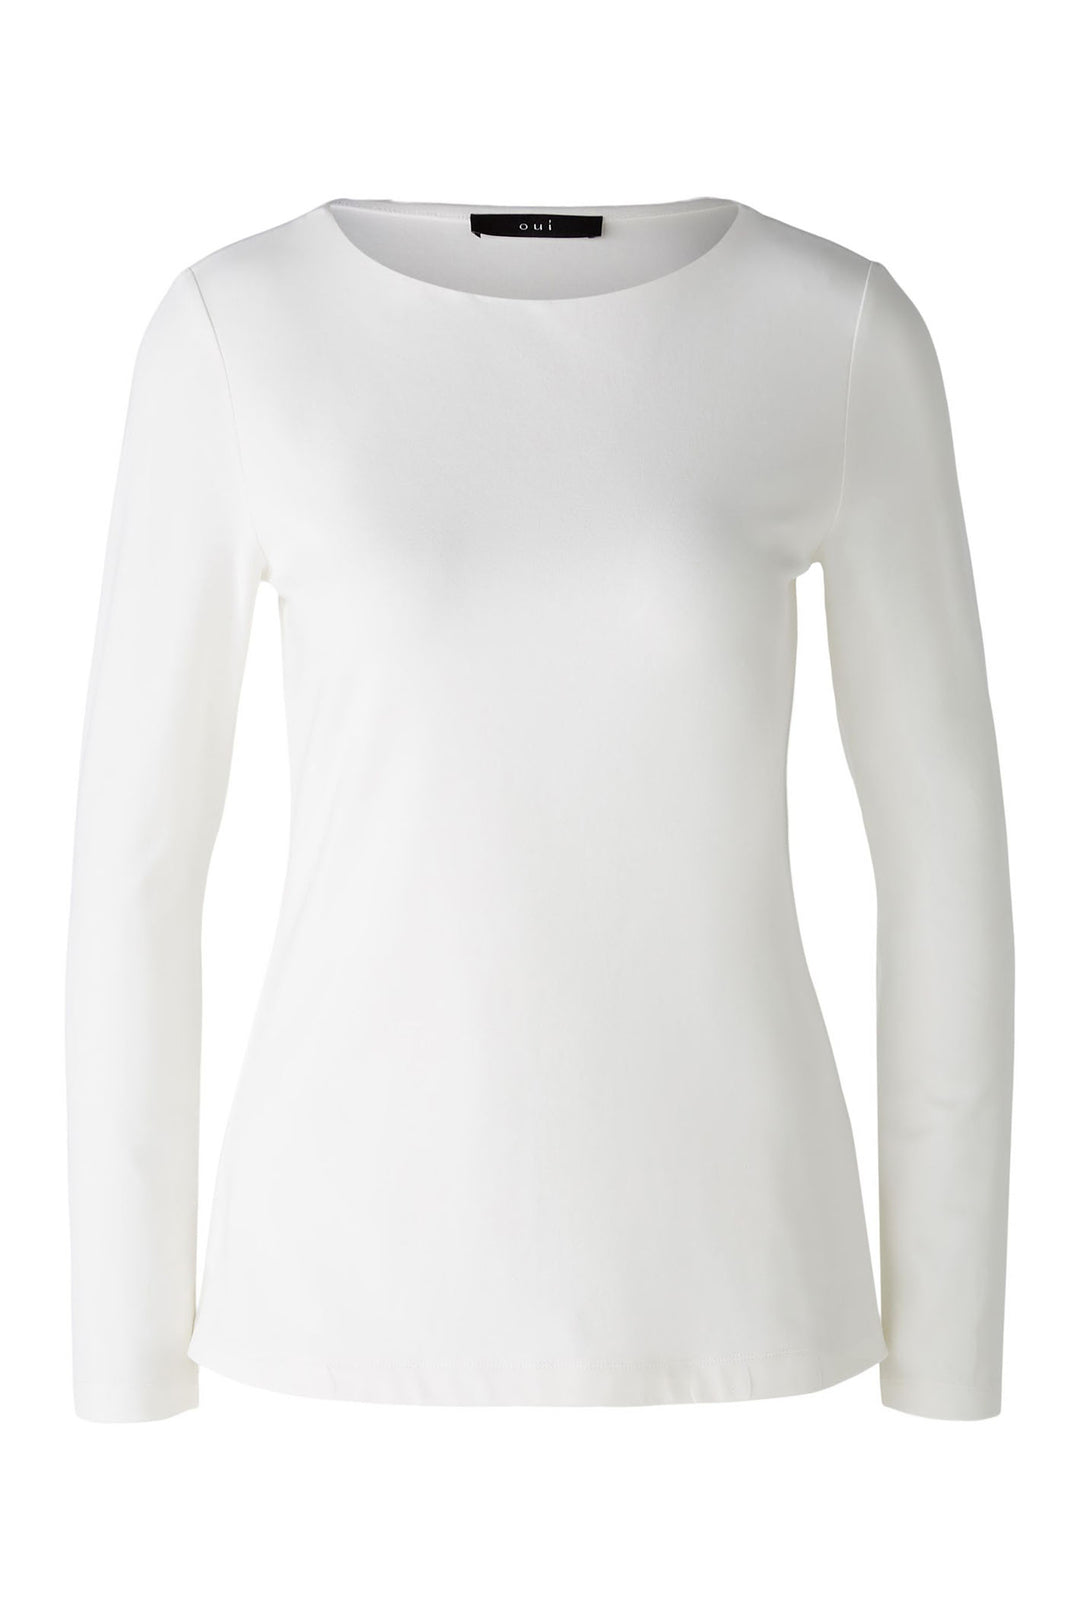 Oui 85879 Cloud Dancer Off-White Long Sleeved Round Neck Top - Olivia Grace Fashion